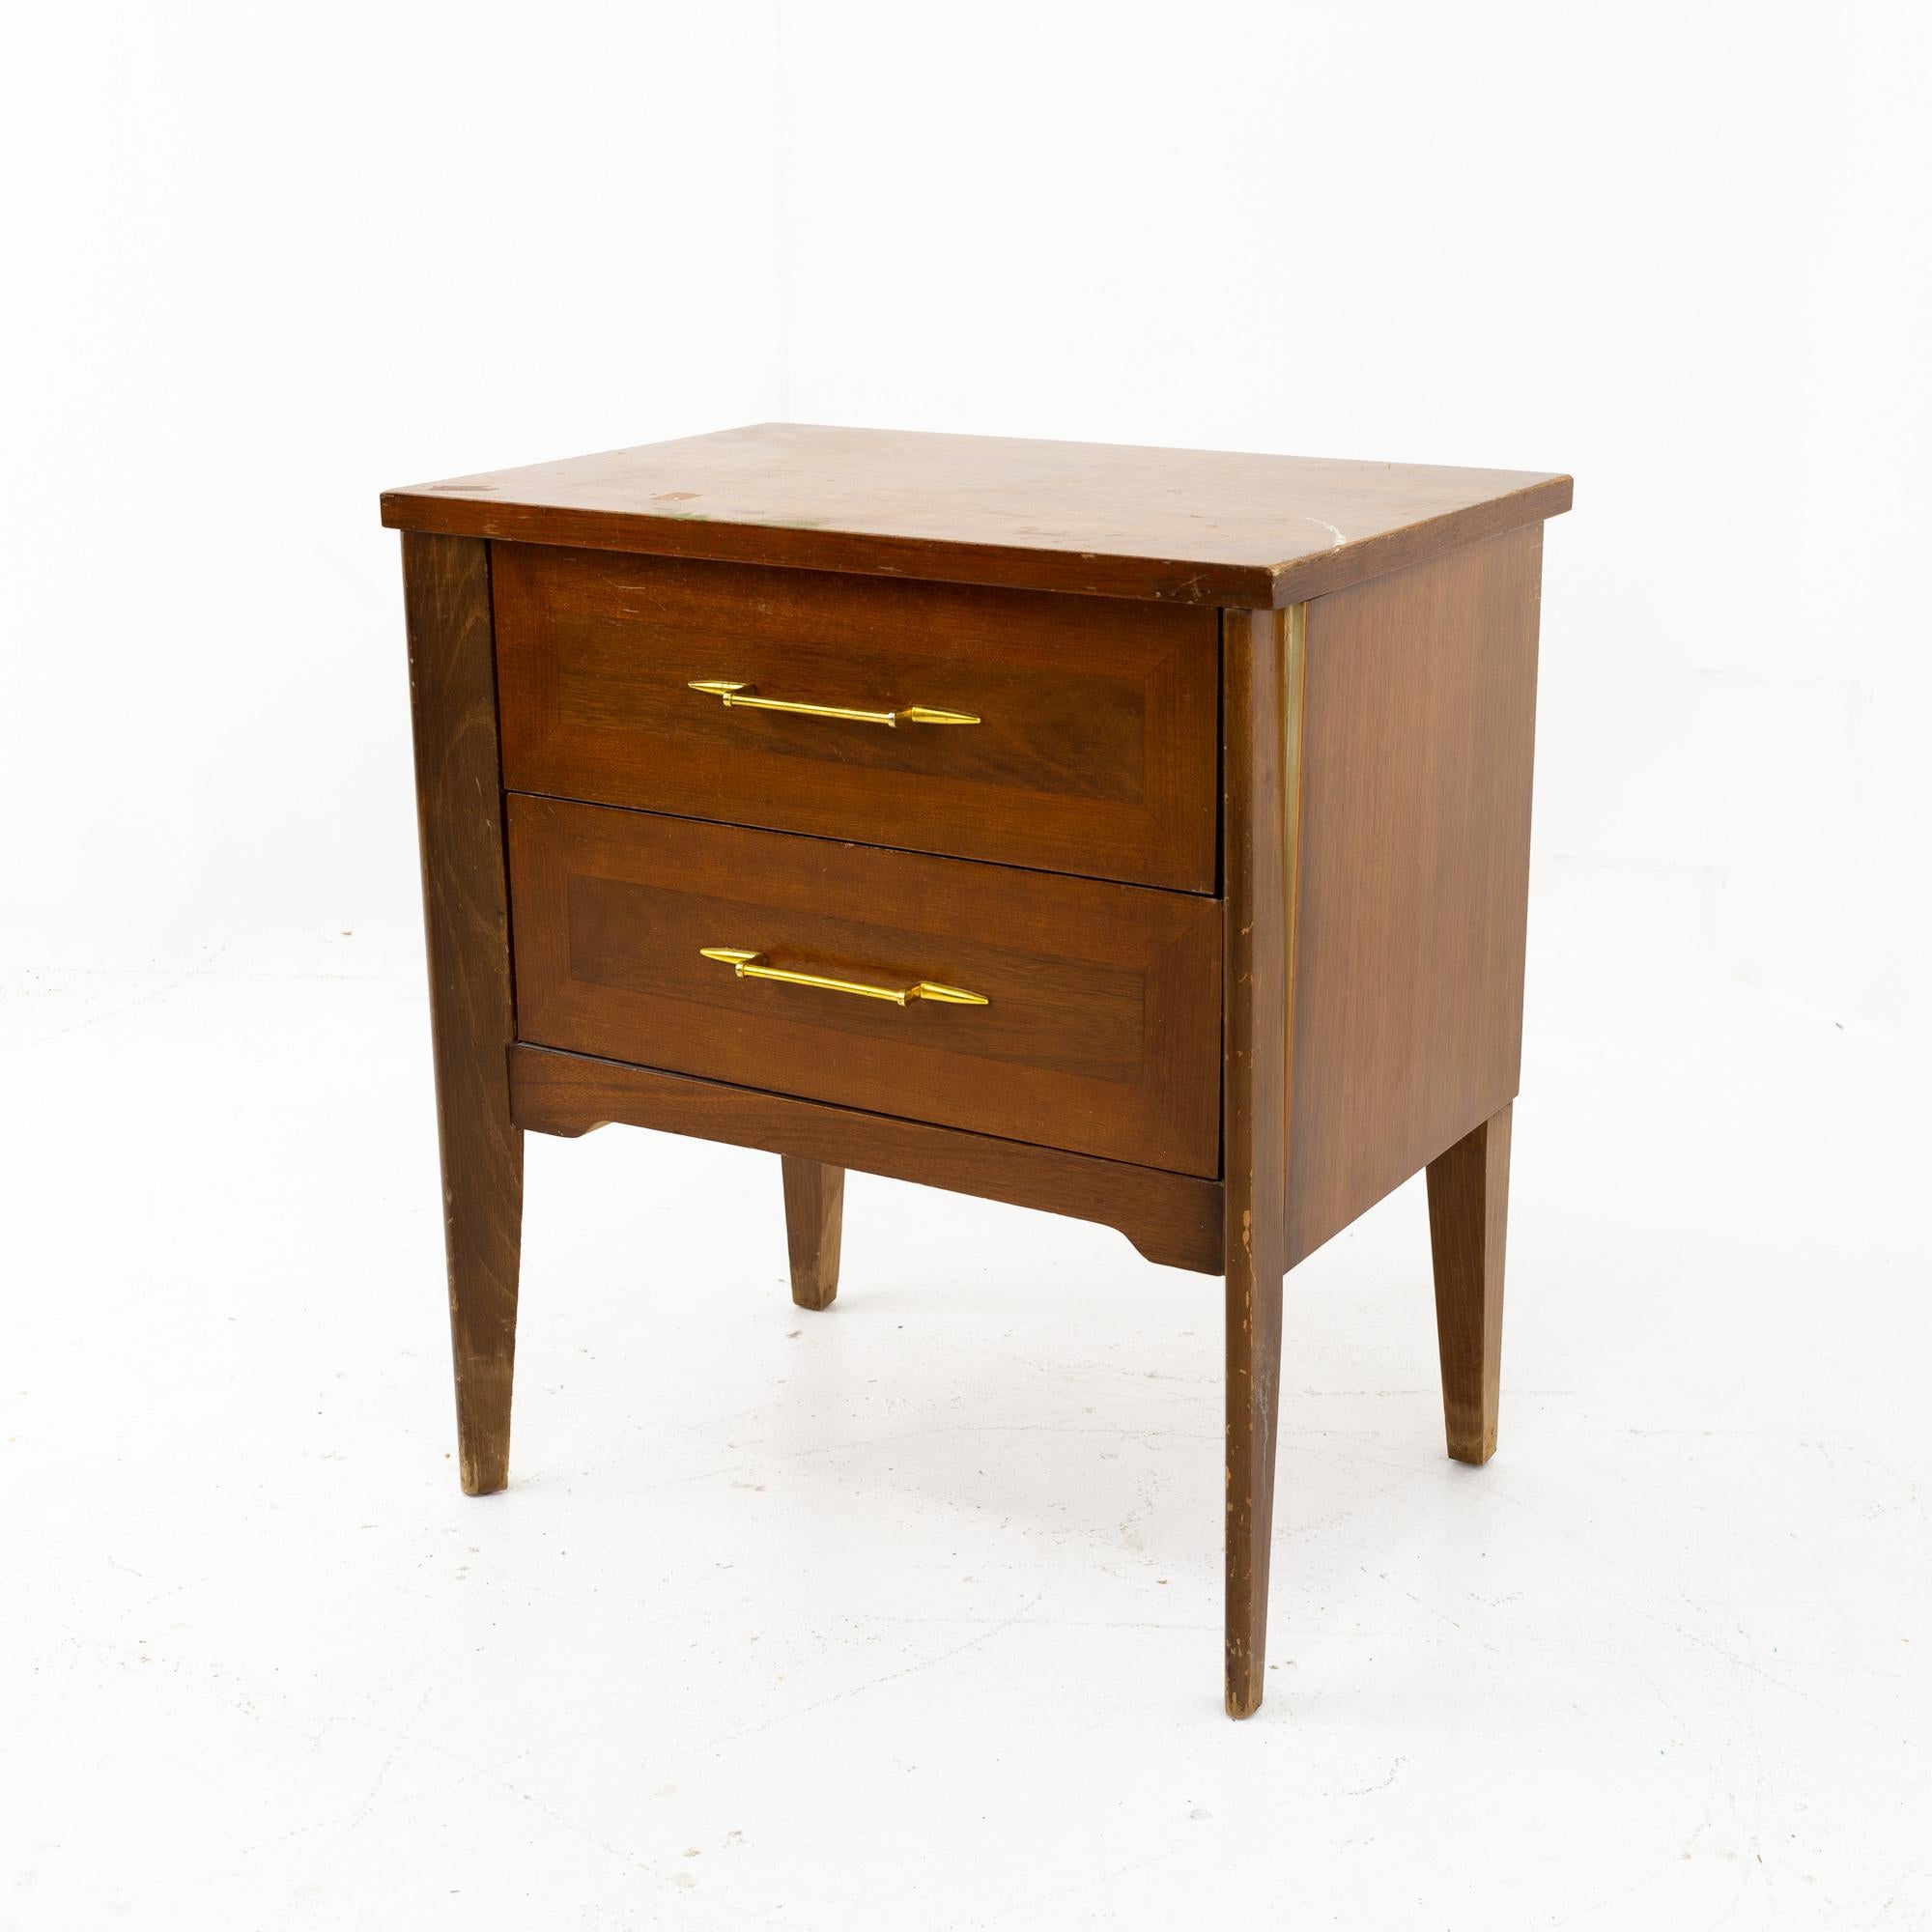 Harmony House mid century walnut and brass 2 drawer nightstand
This nightstand is 22 wide x 15 deep x 24.25 inches high

All pieces of furniture can be had in what we call restored vintage condition. That means the piece is restored upon purchase